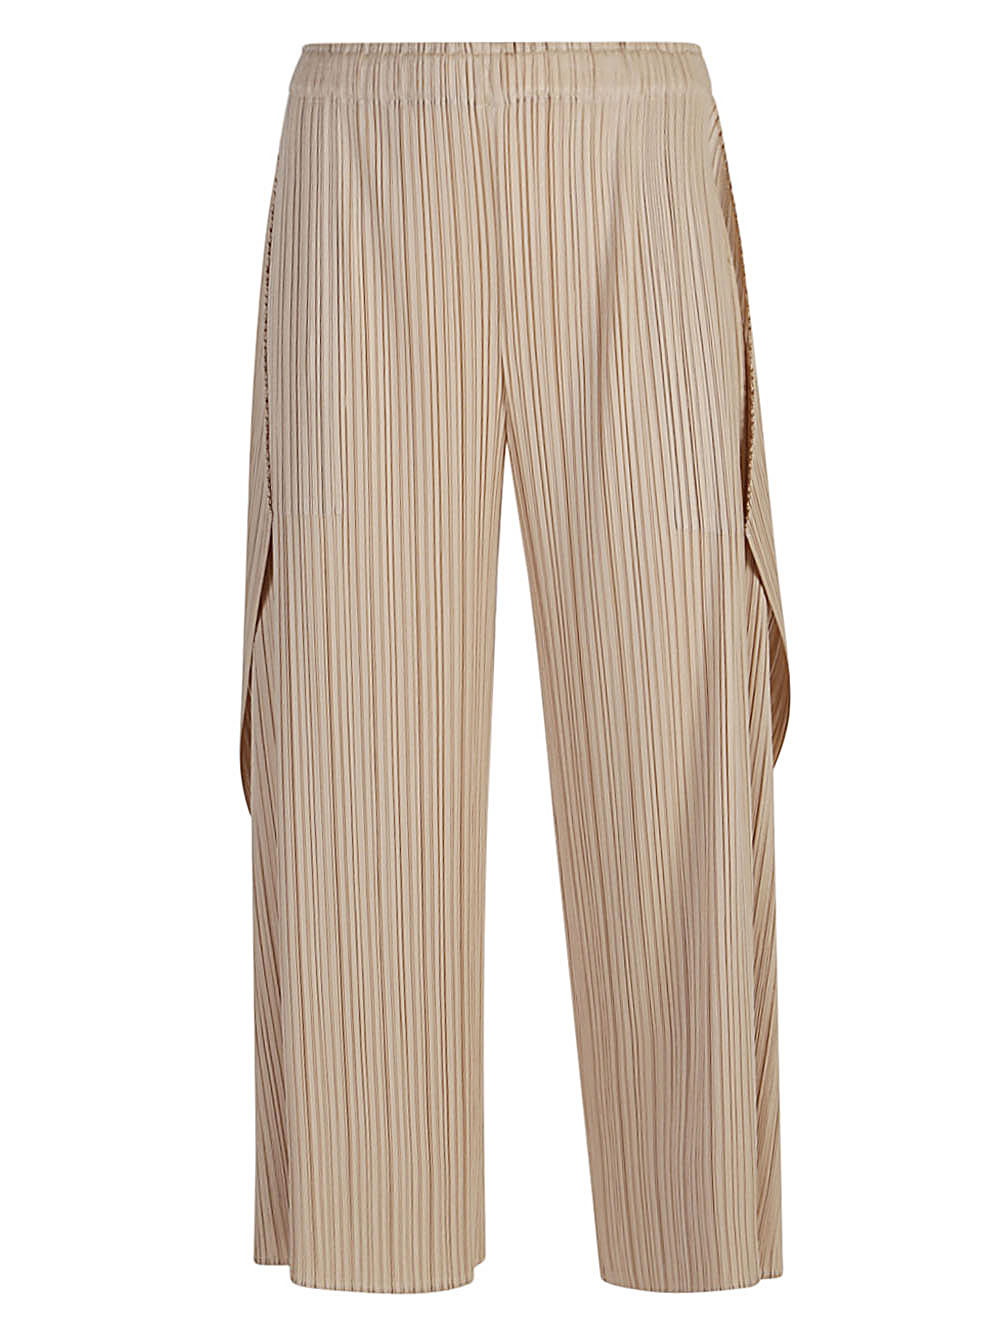 PLEATS PLEASE ISSEY MIYAKE - Pleated Trousers Pleats Please Issey Miyake